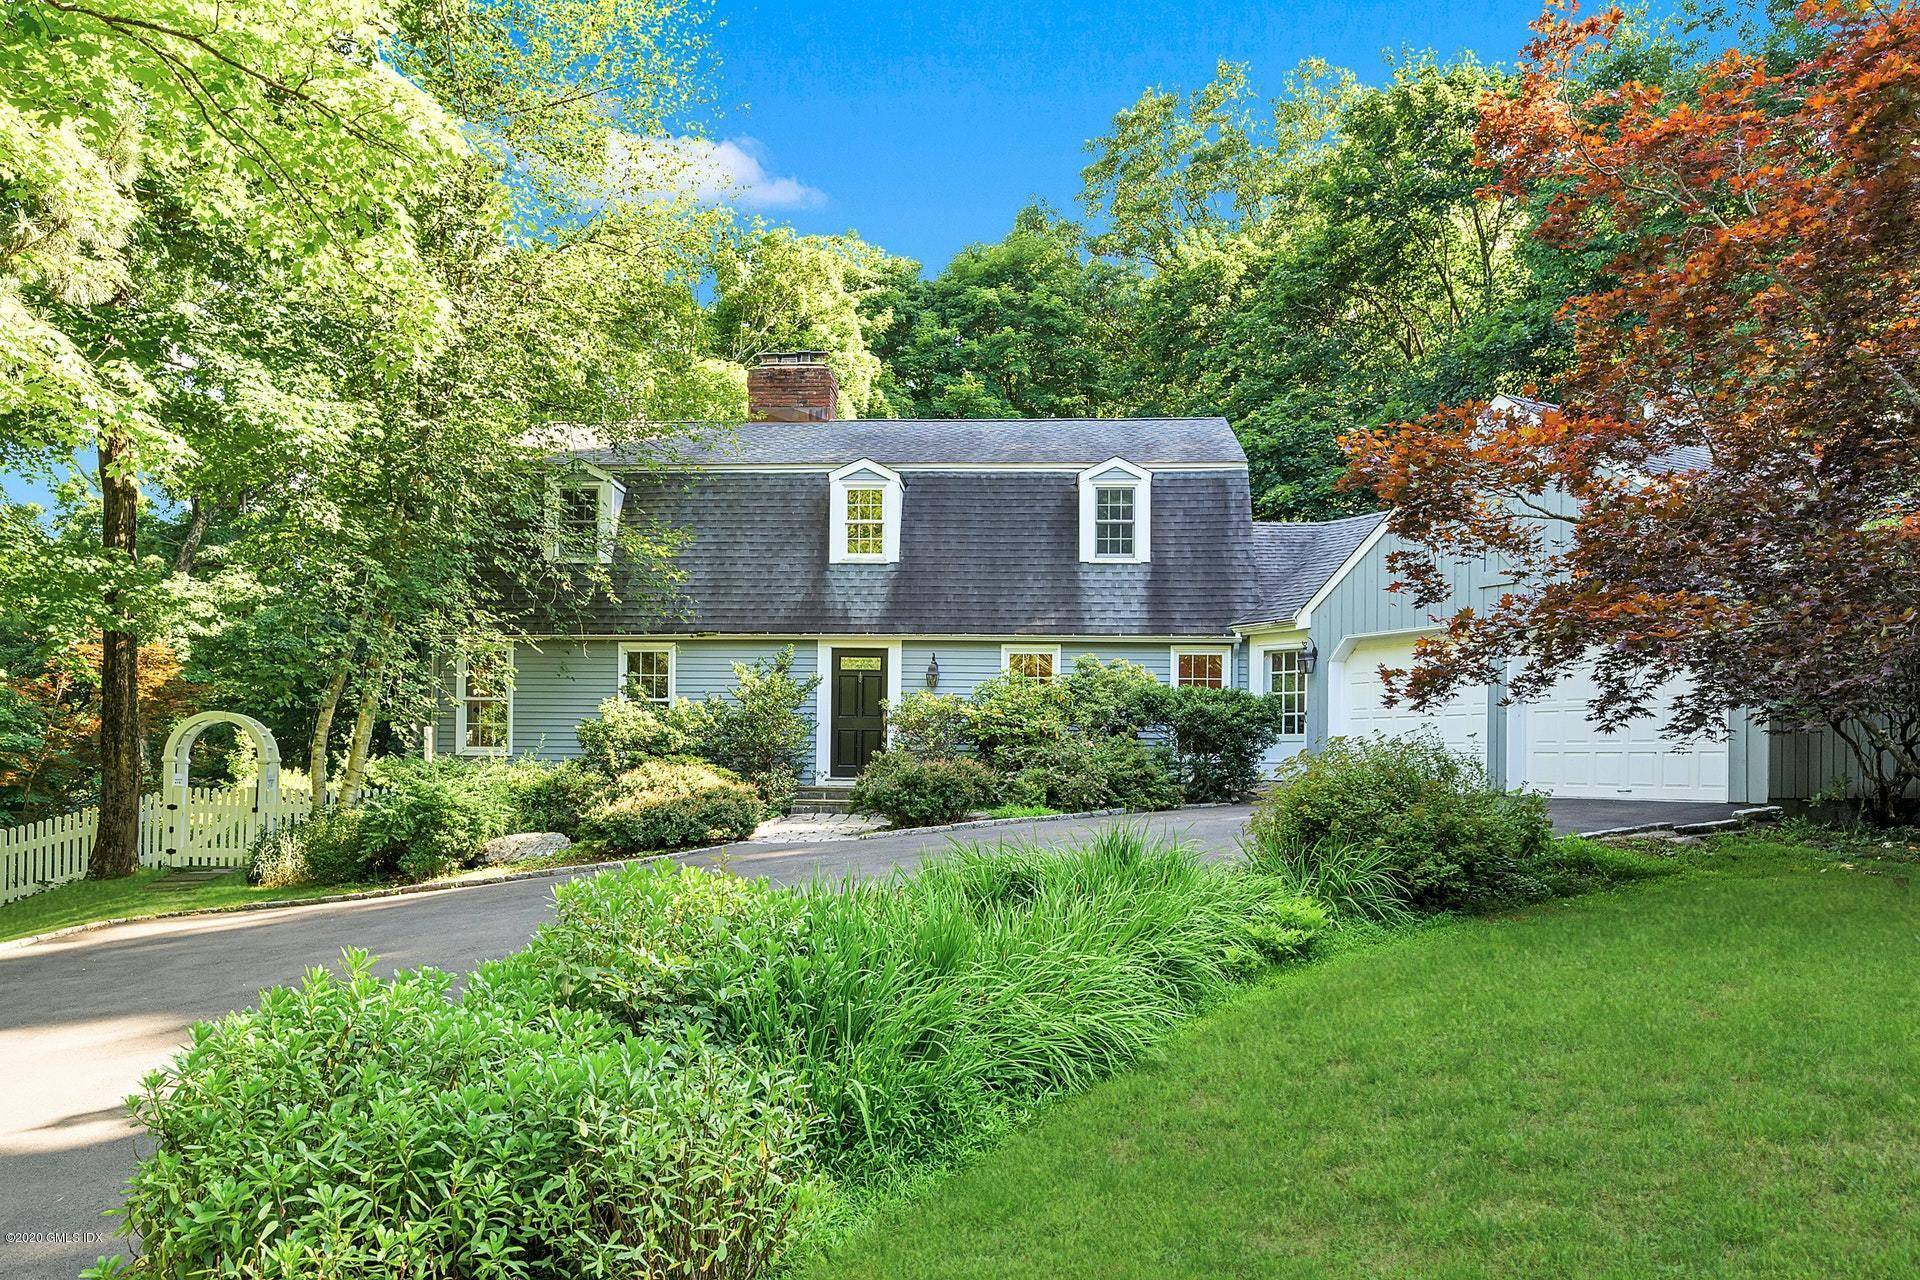 You've been looking for that special place in a scenic place that feels like a vacation hideout, but it's just 15 minutes to downtown Greenwich or downtown Stamford !